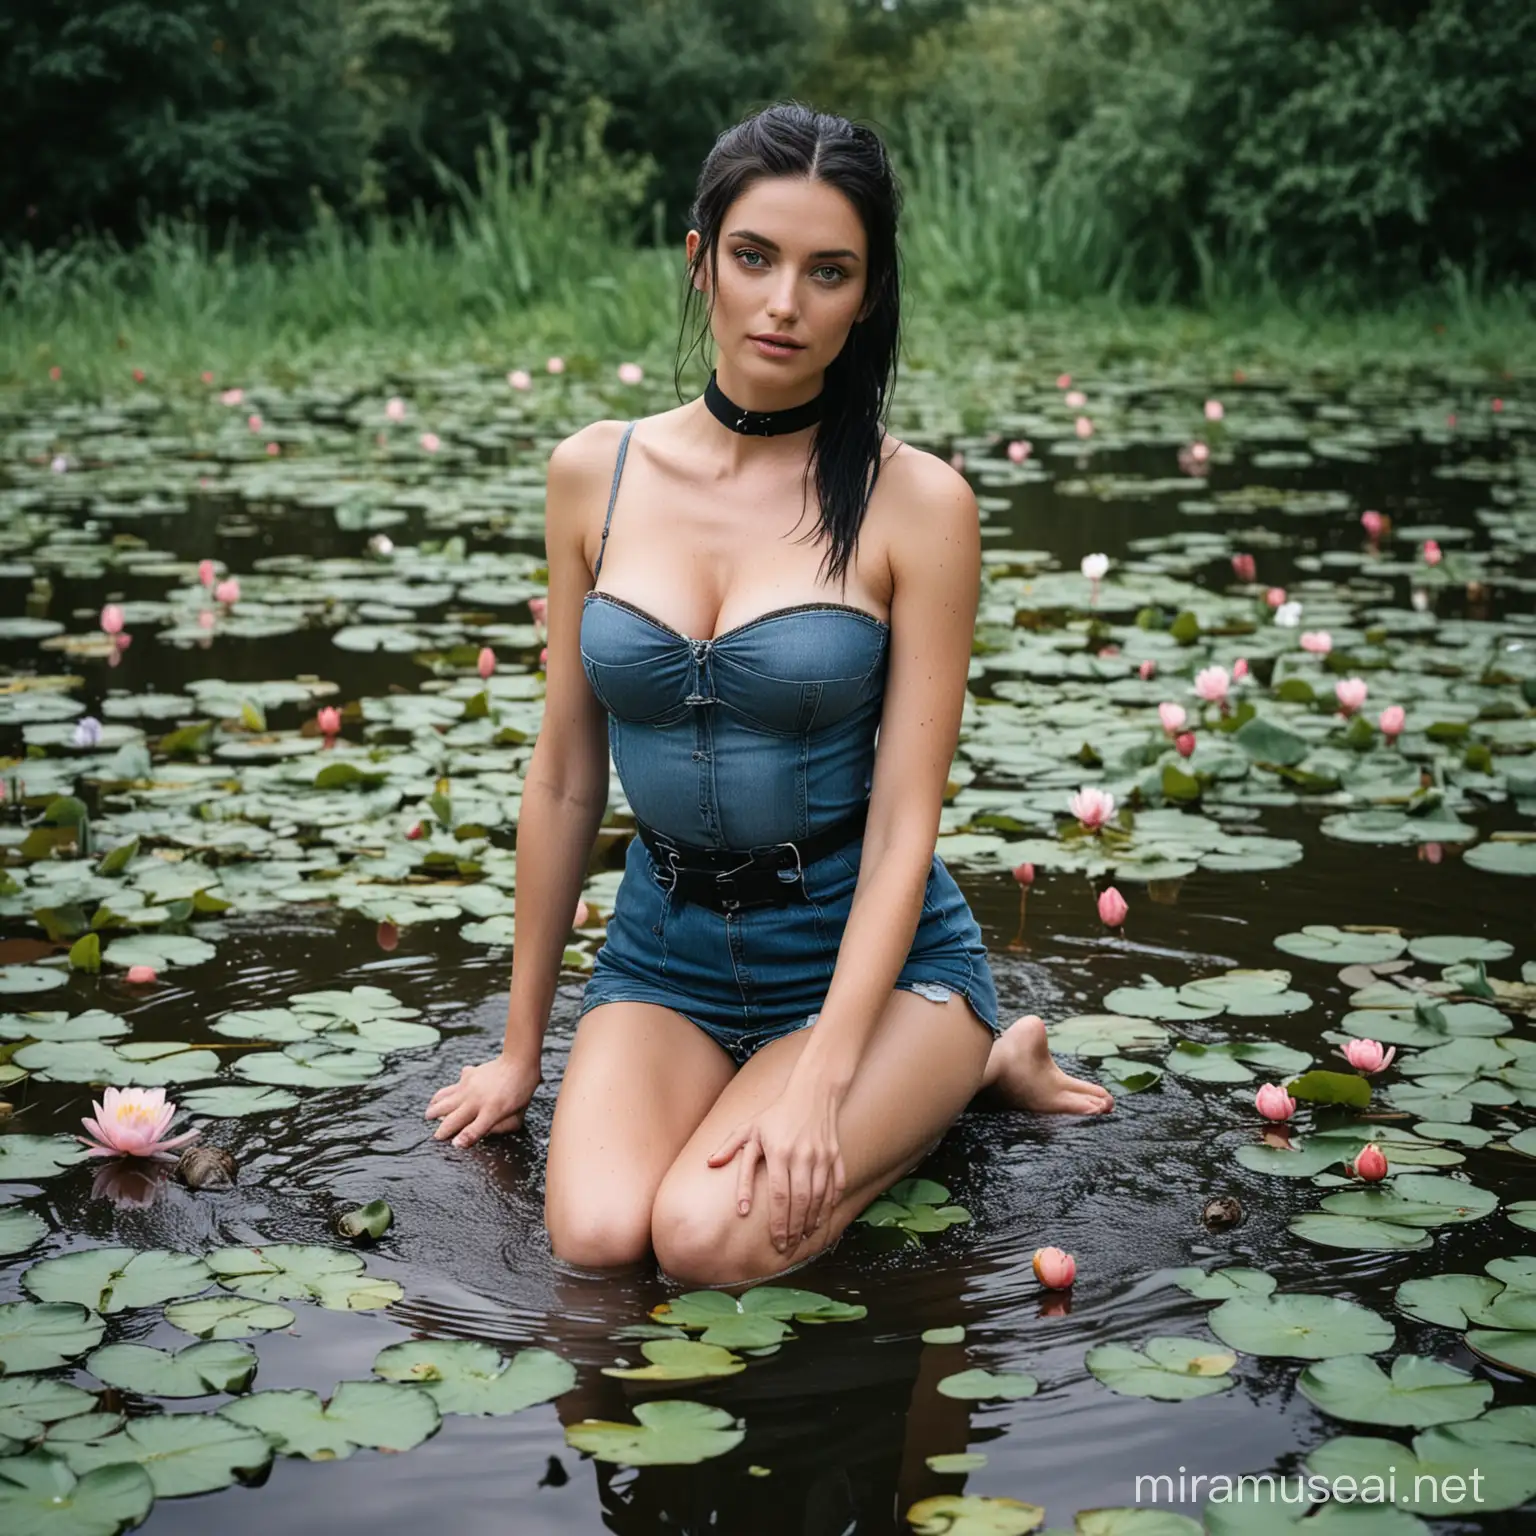 Dramatic Portrait of a Drenched Model Trapped in a Pond with Toads